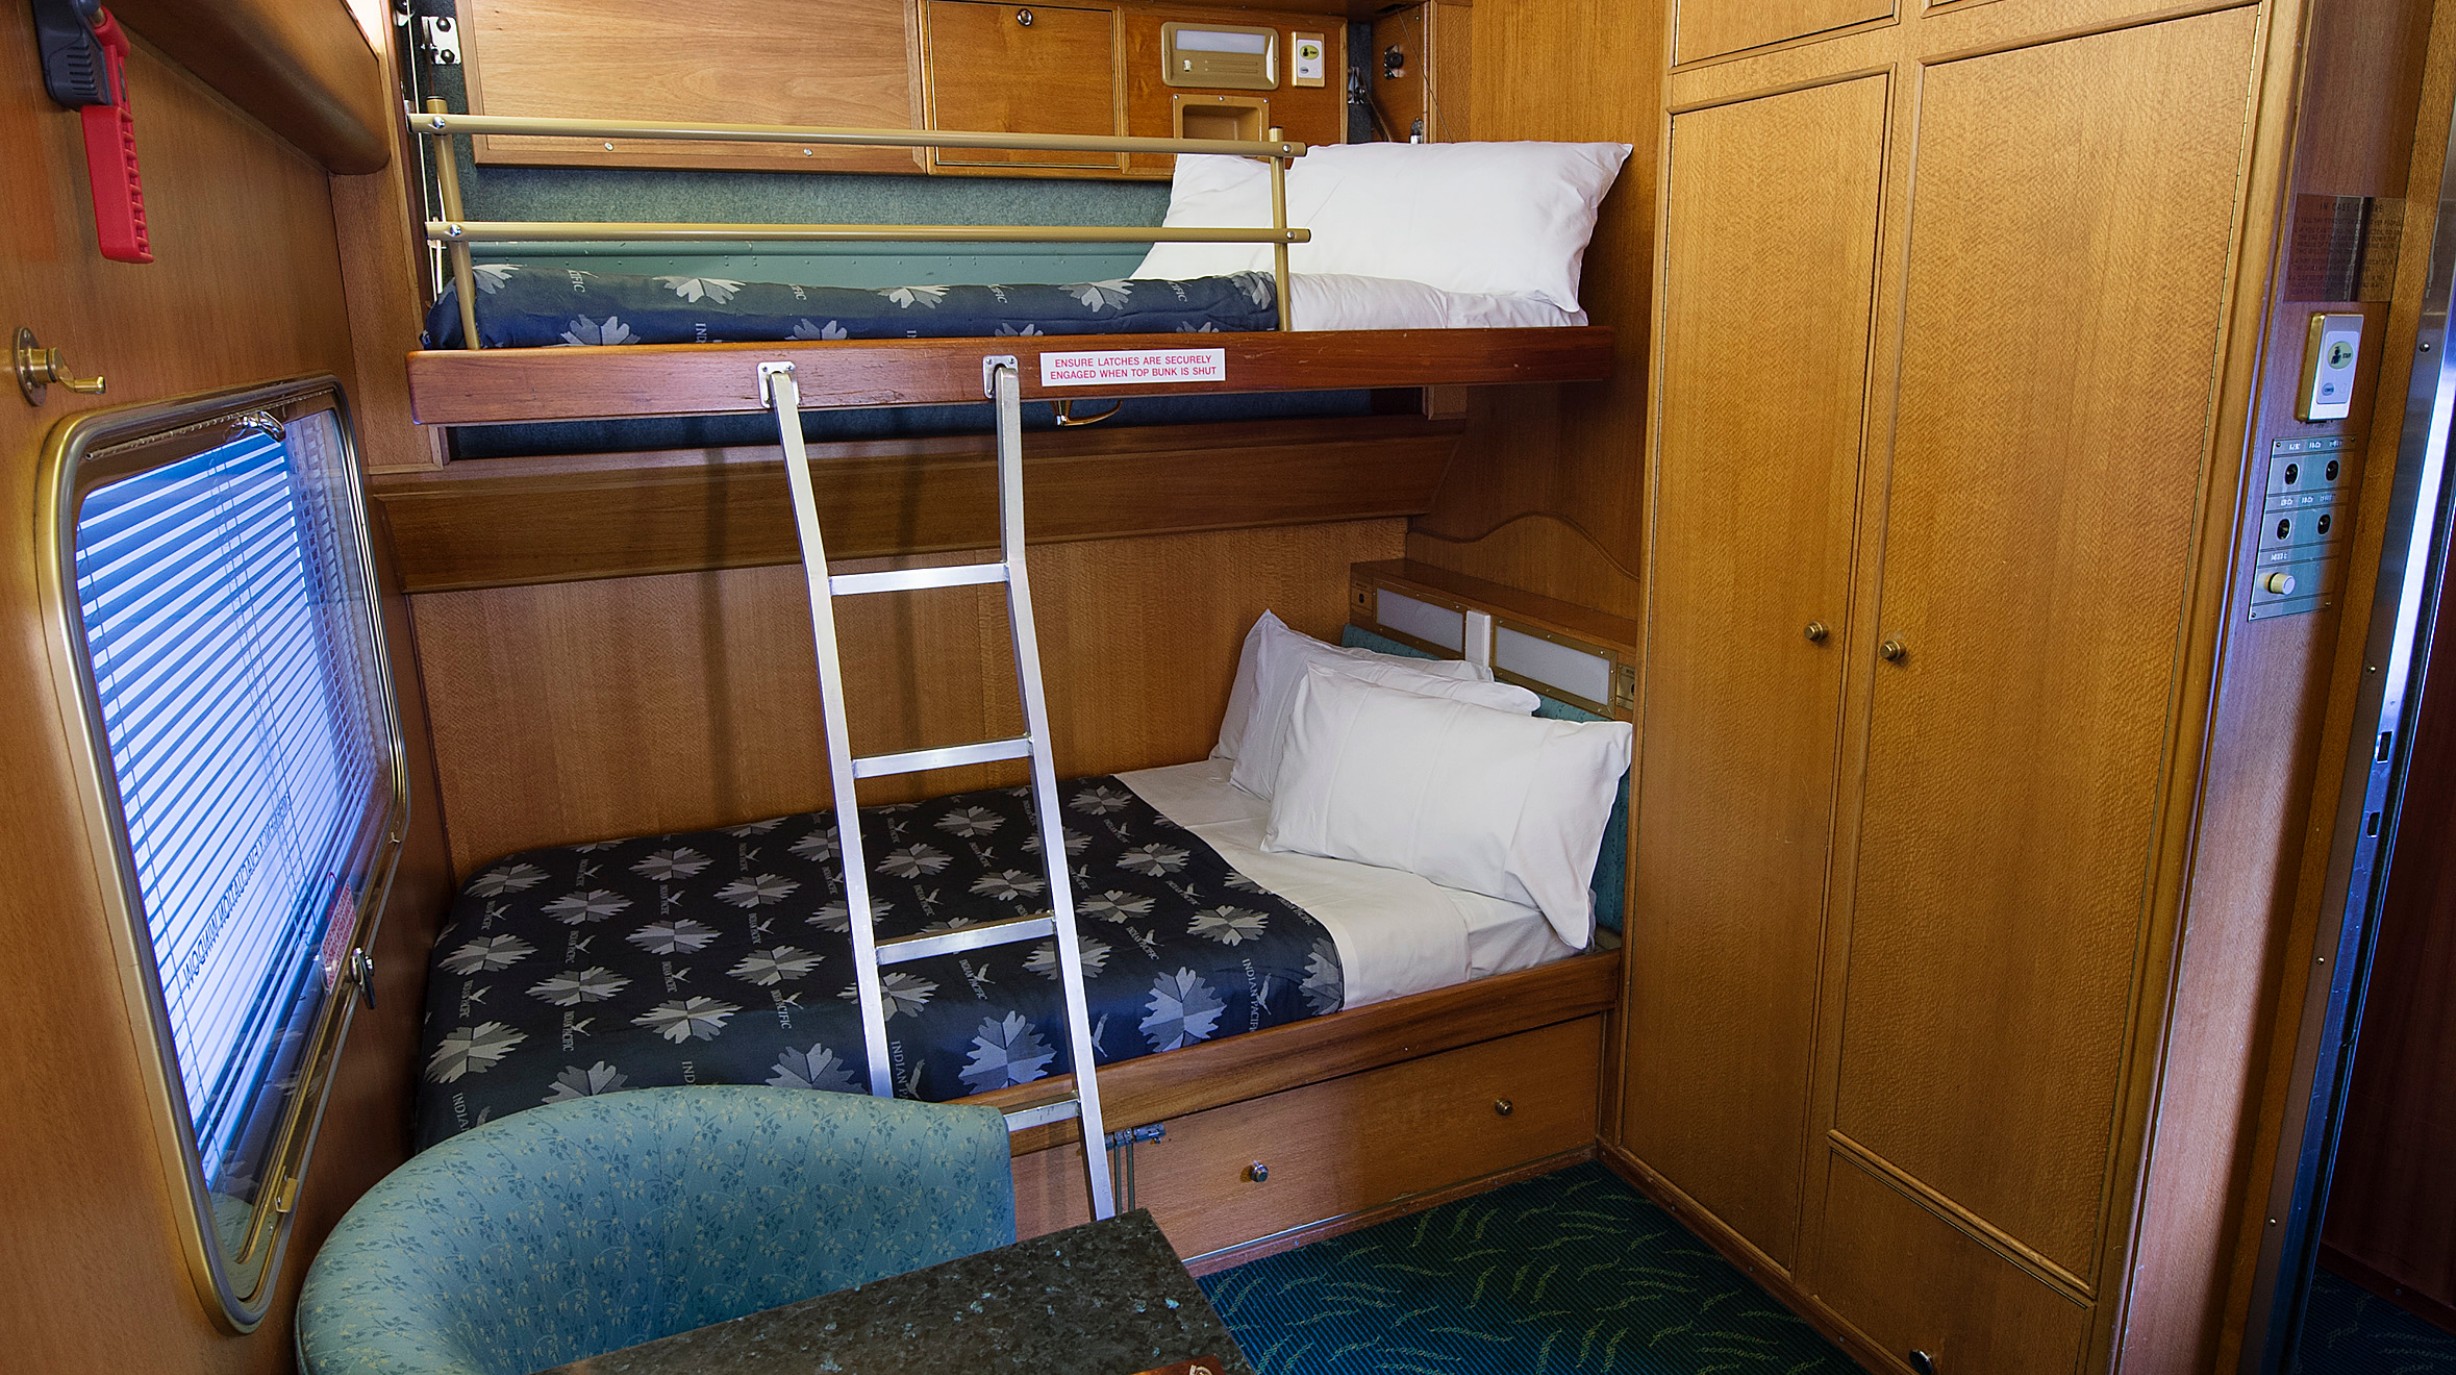 Gold Service Superior Cabin - Indian Pacific only